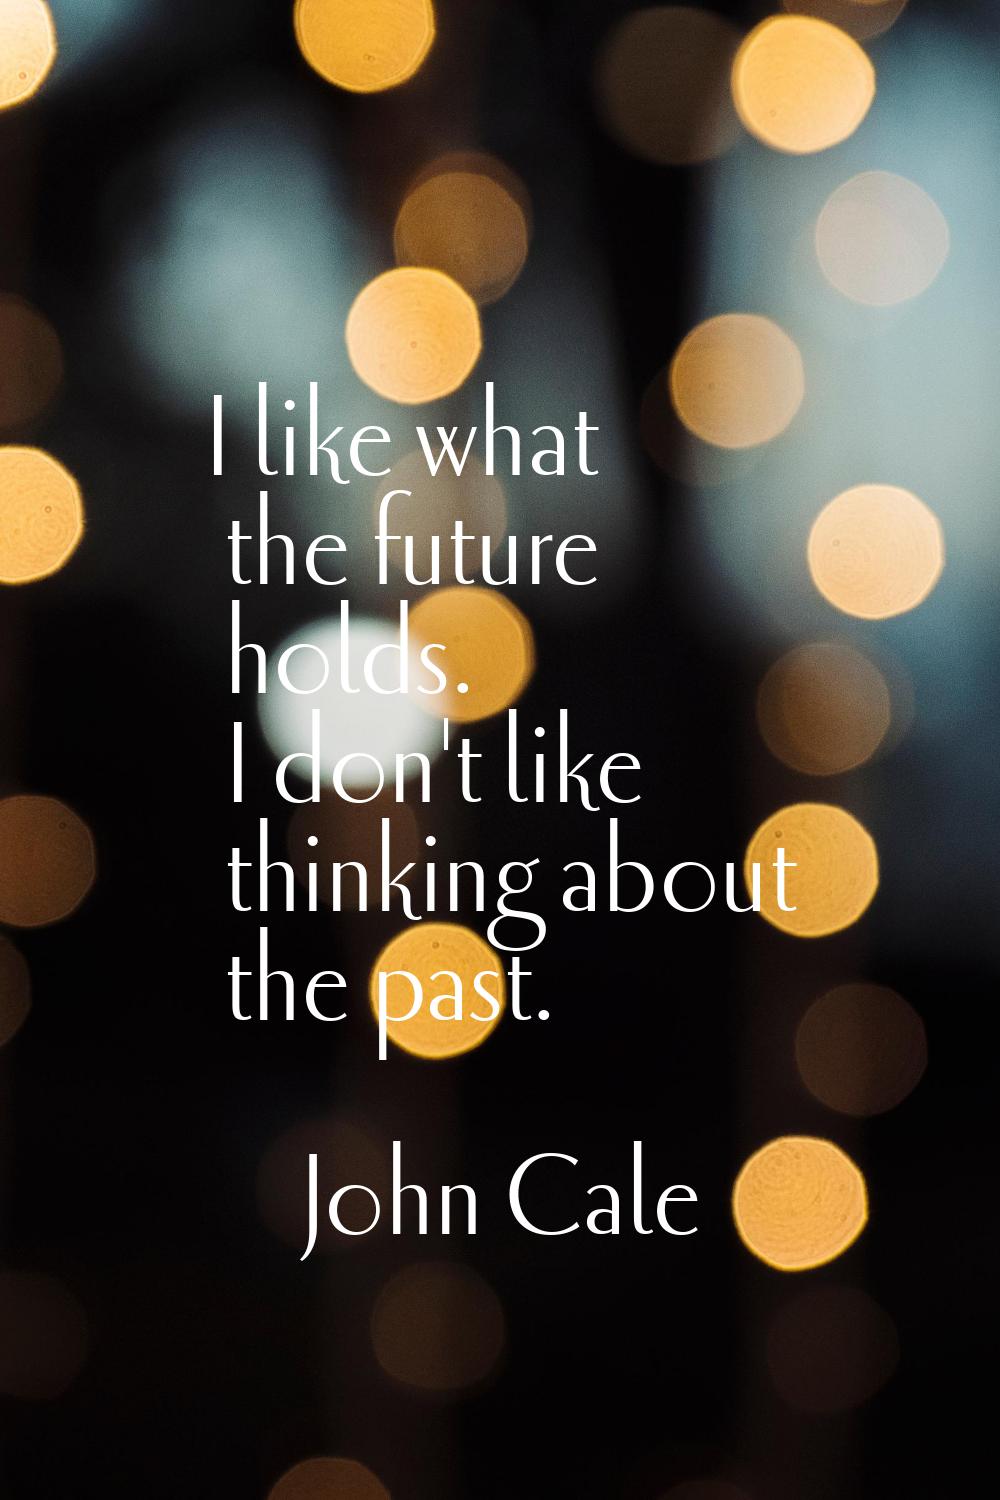 I like what the future holds. I don't like thinking about the past.